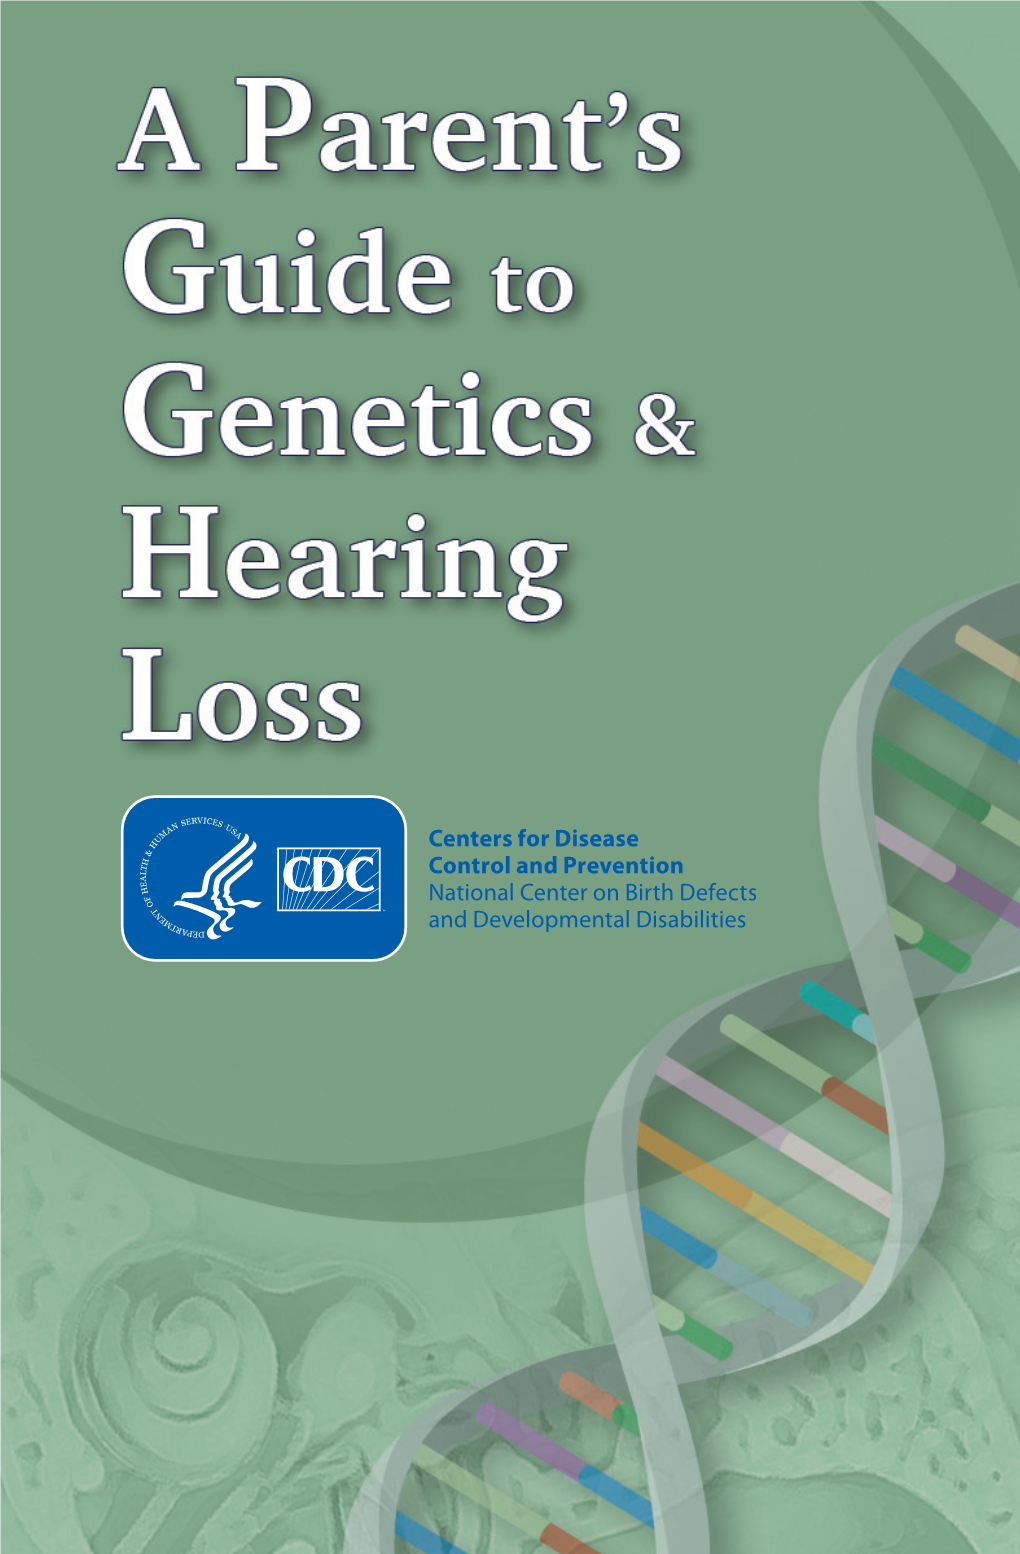 A Parent's Guide to Genetics and Hearing Loss